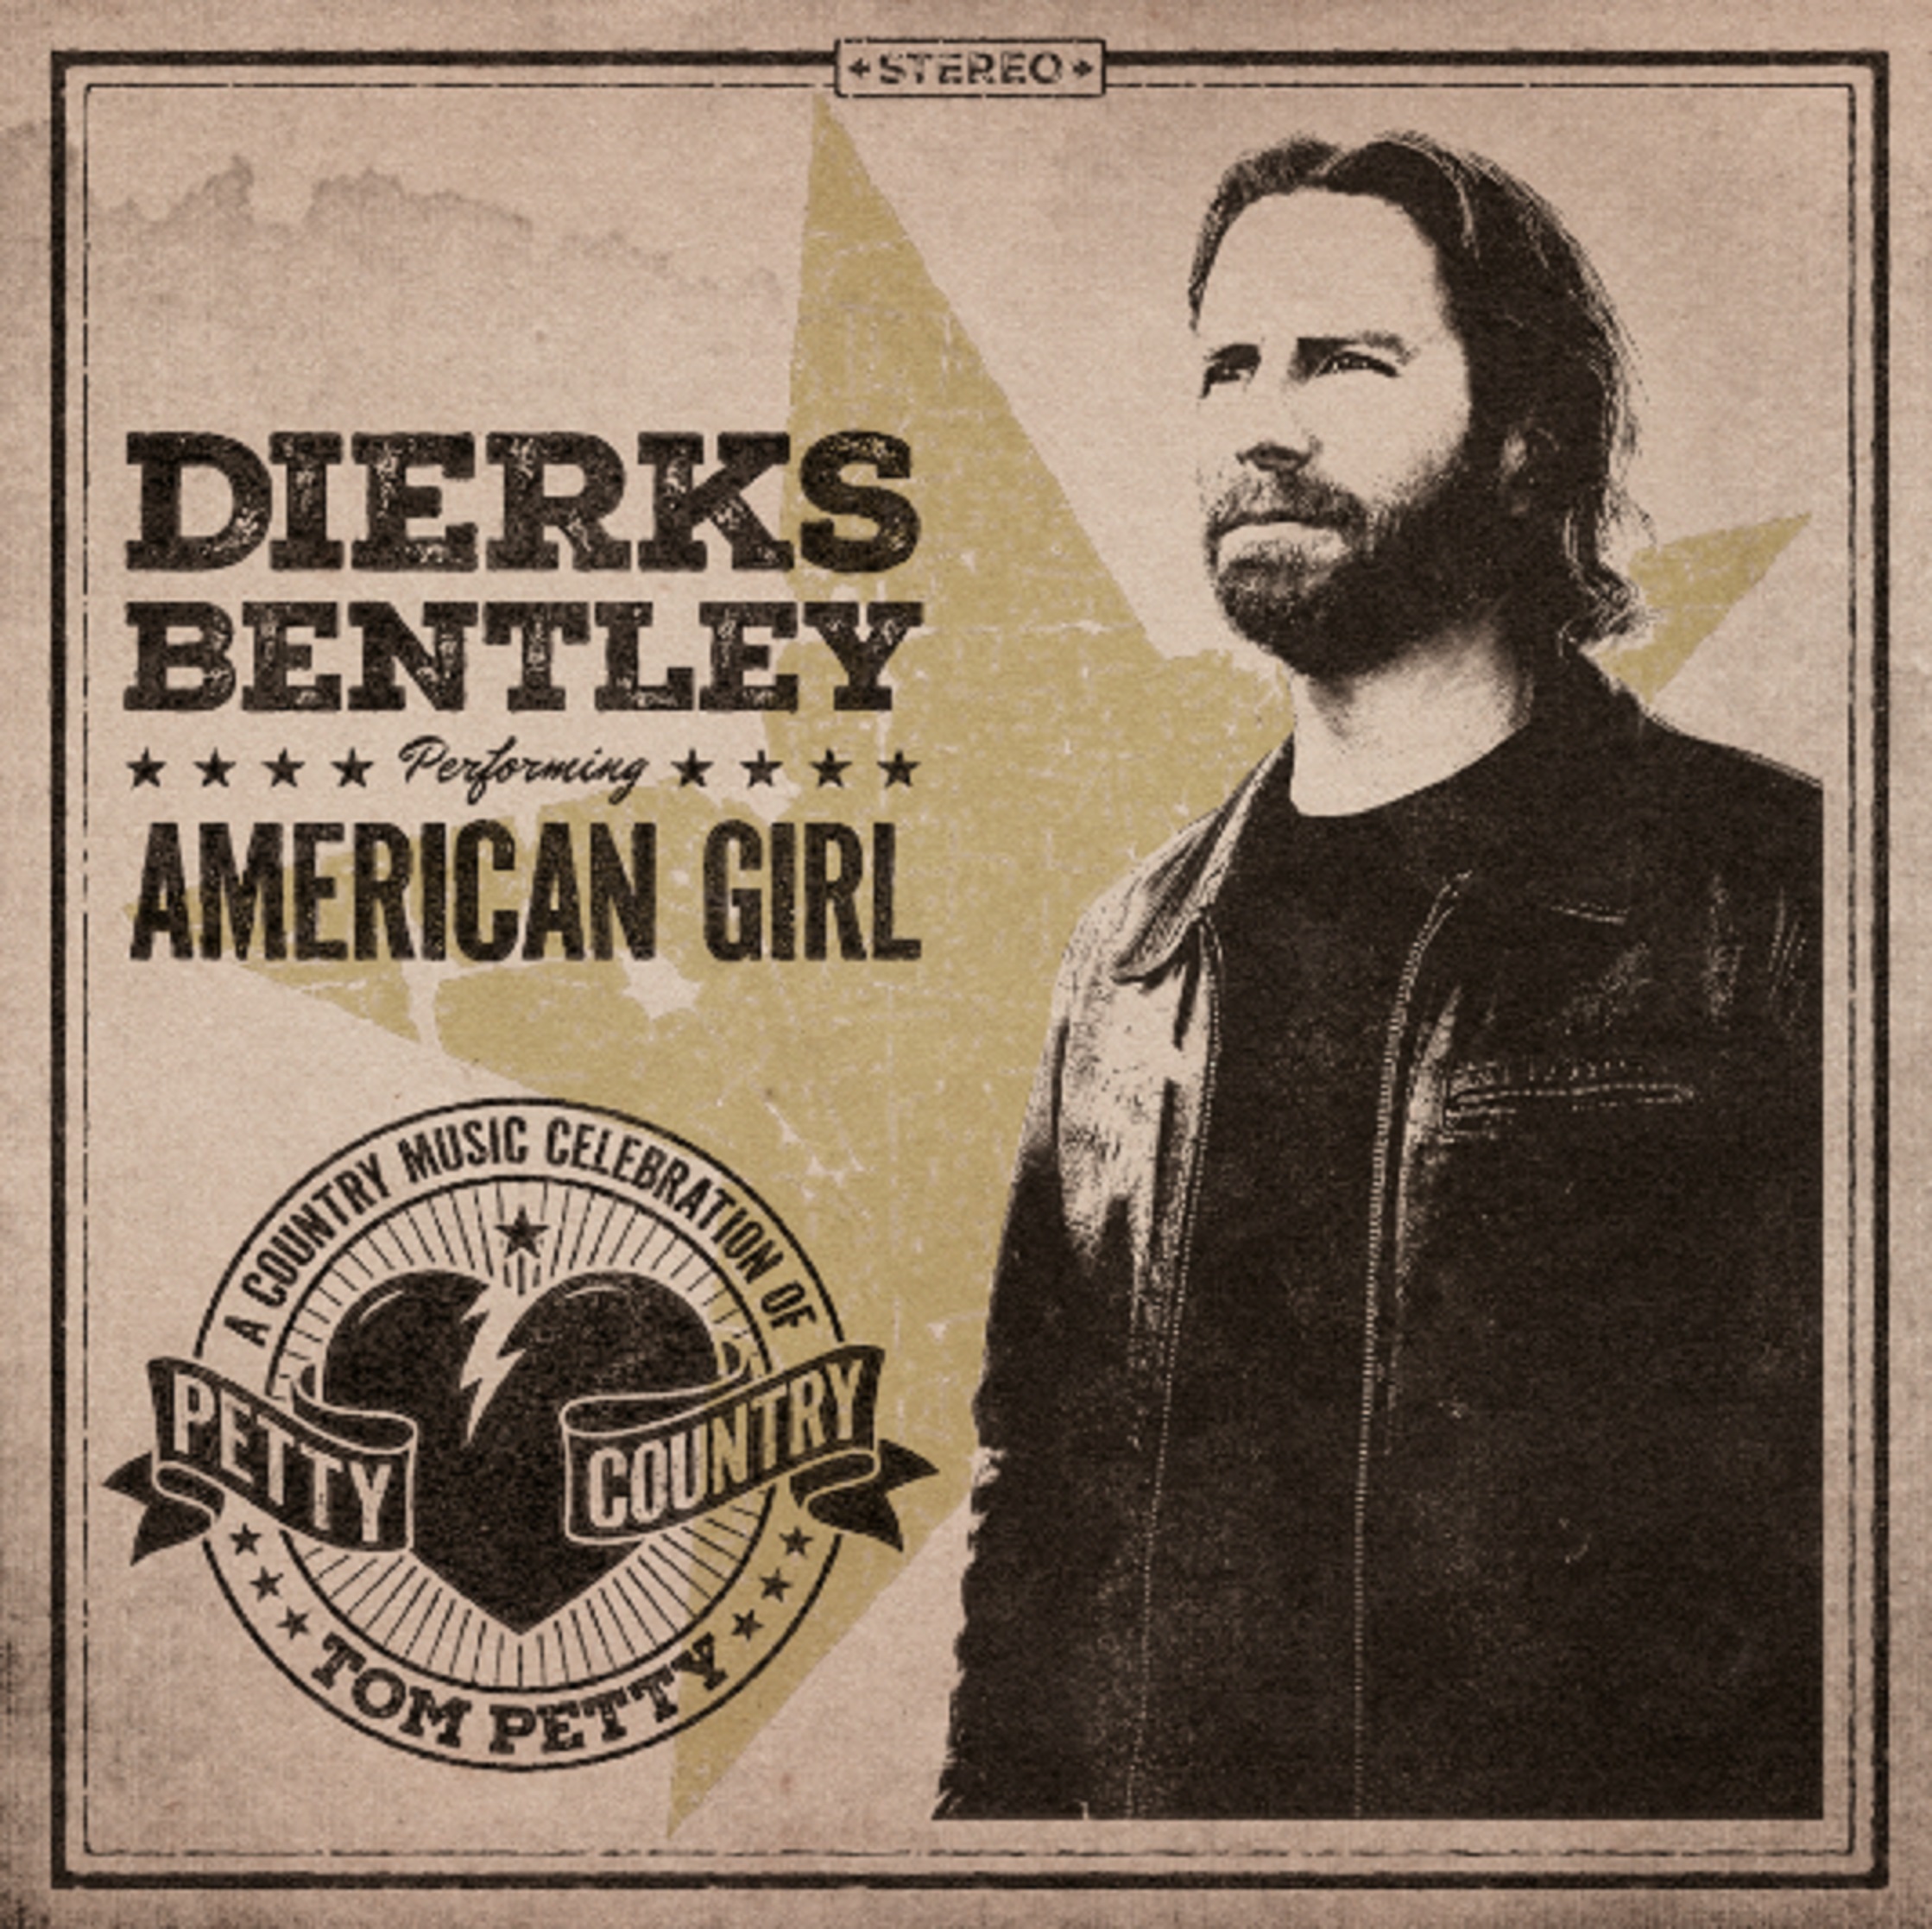 Hear Dierks Bentley's Take on “American Girl” – Out Now